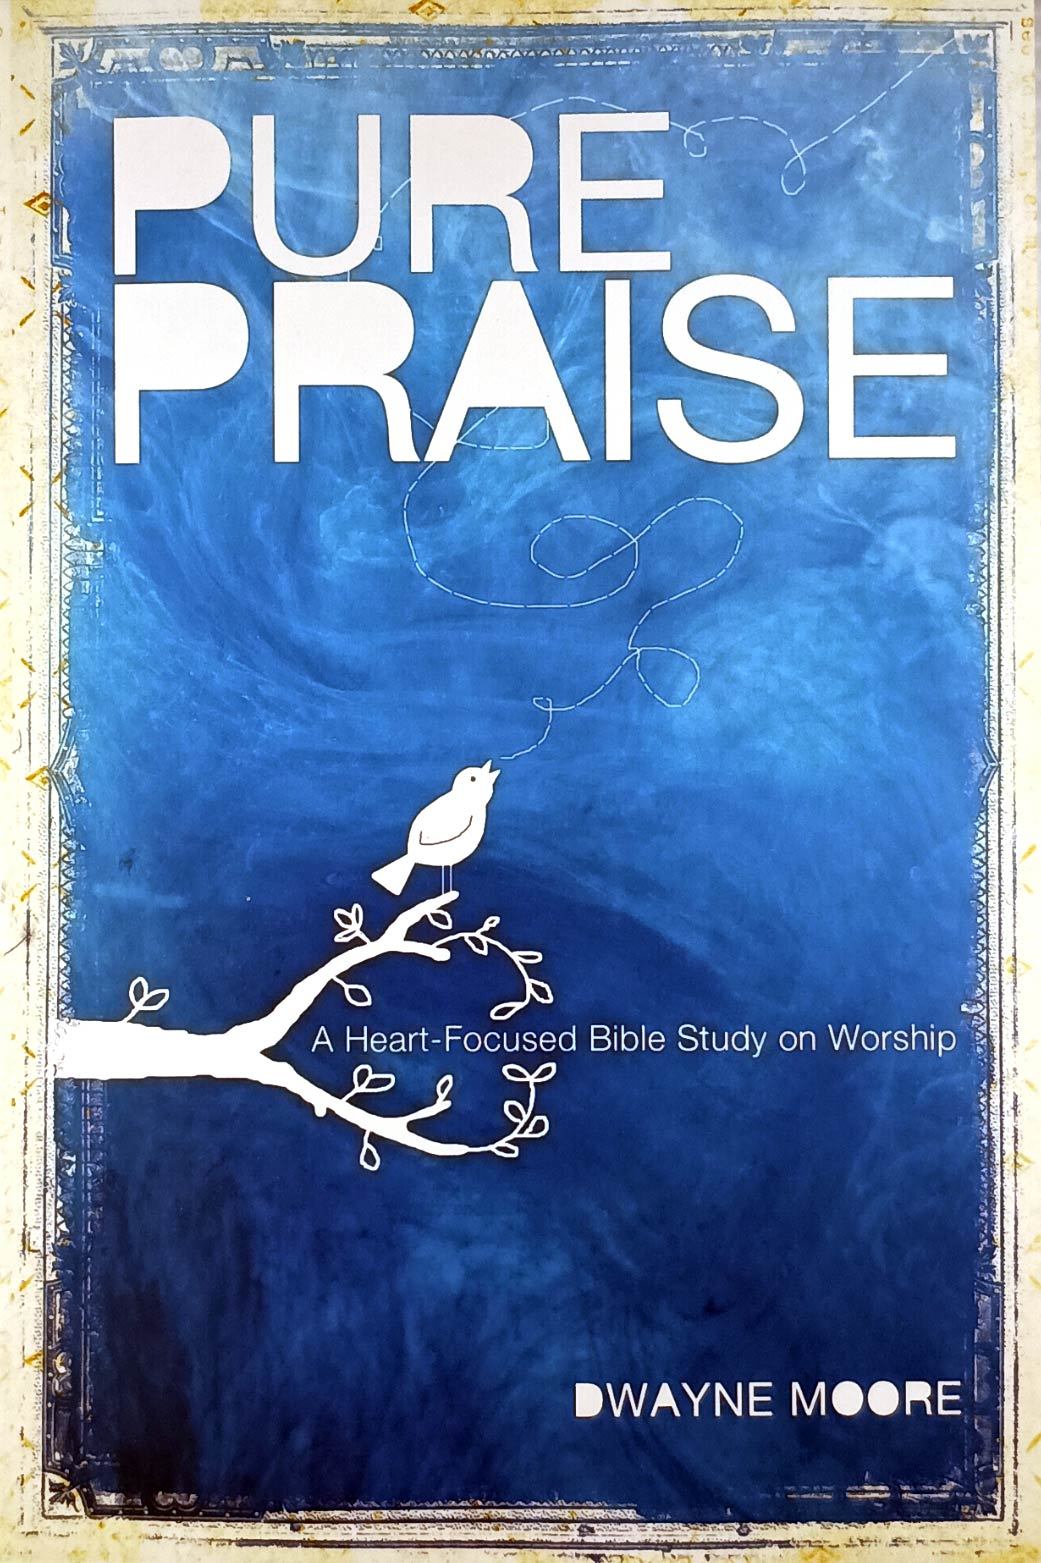 Primary image for Pure Praise: A Heart-Focused Bible Study on Worship by Dwayne Moore